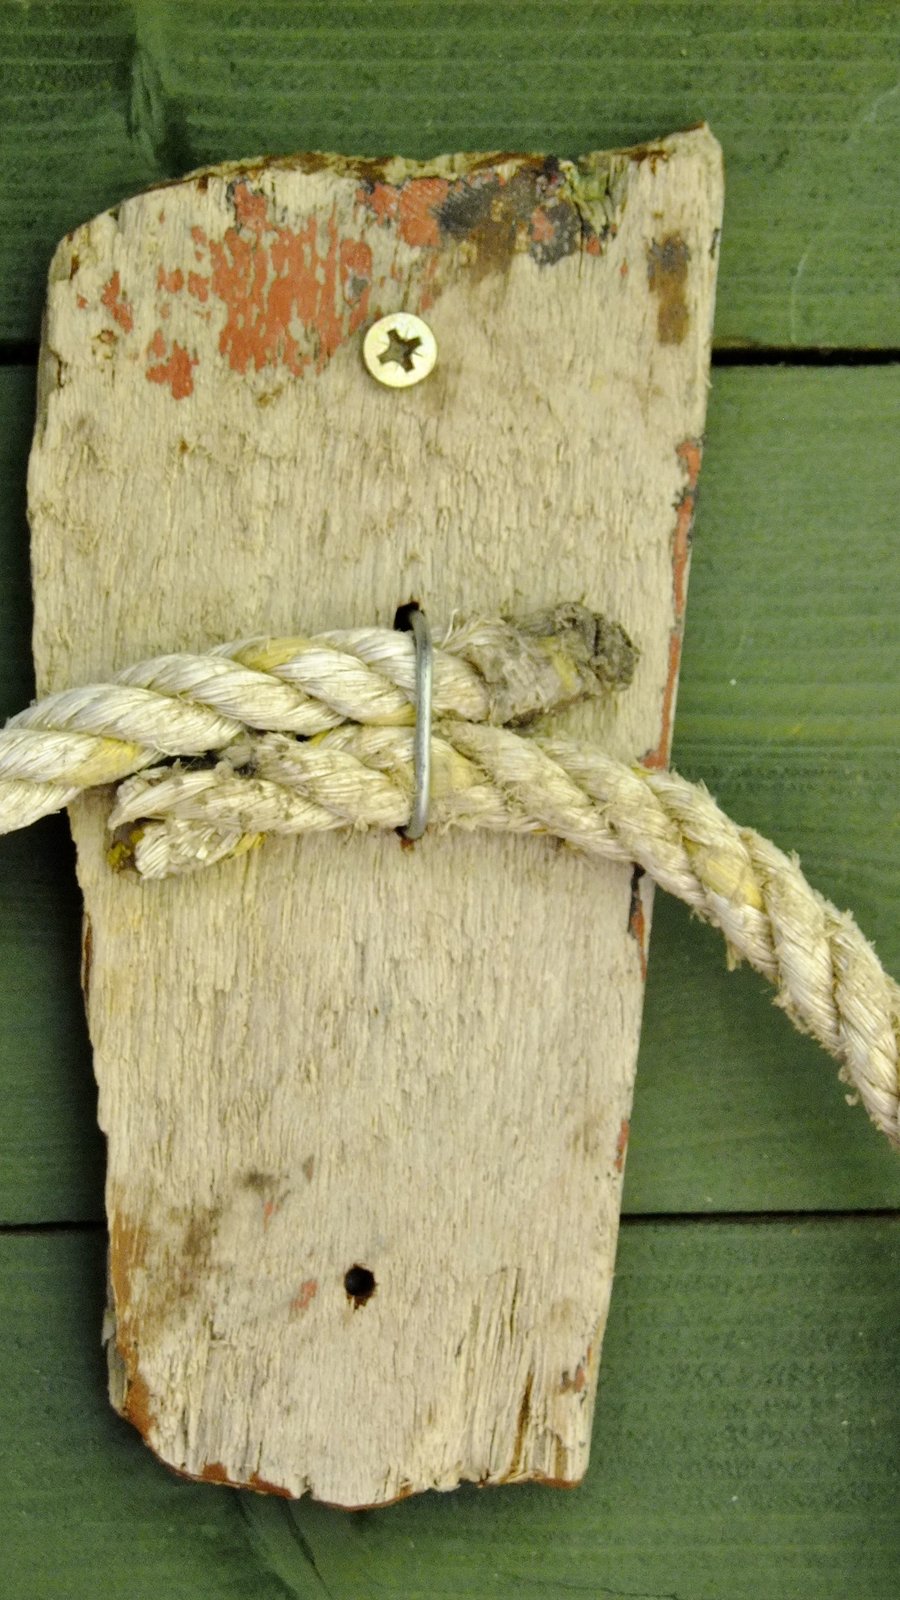 Rustic driftwood towel holder for bathroom or toilet with old rope.